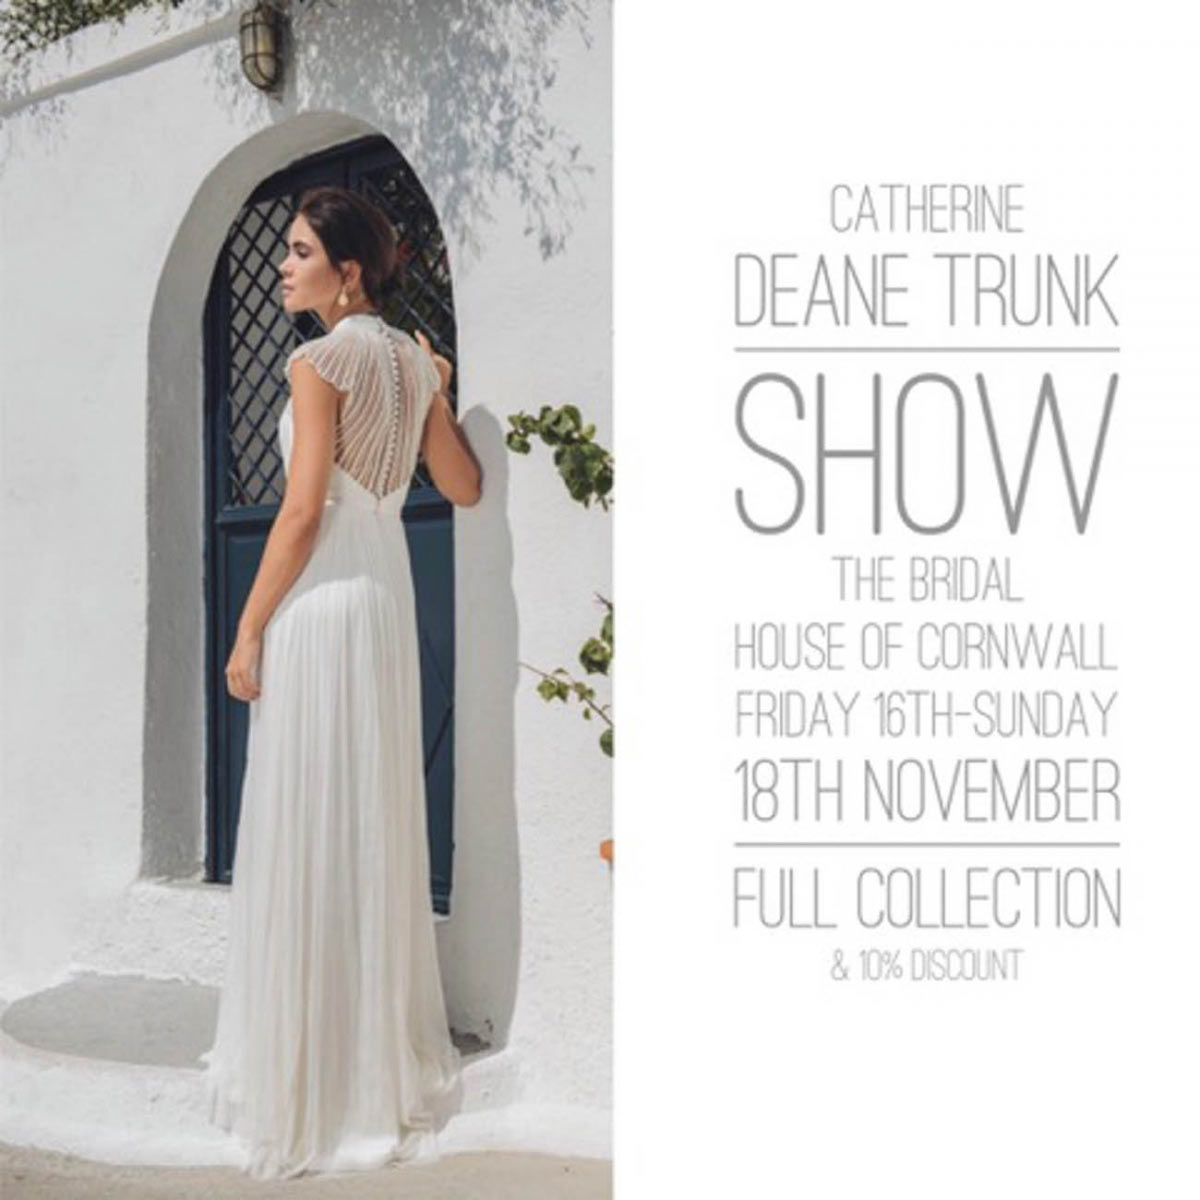 Catherine Deane trunk show at The Bridal House of Cornwall